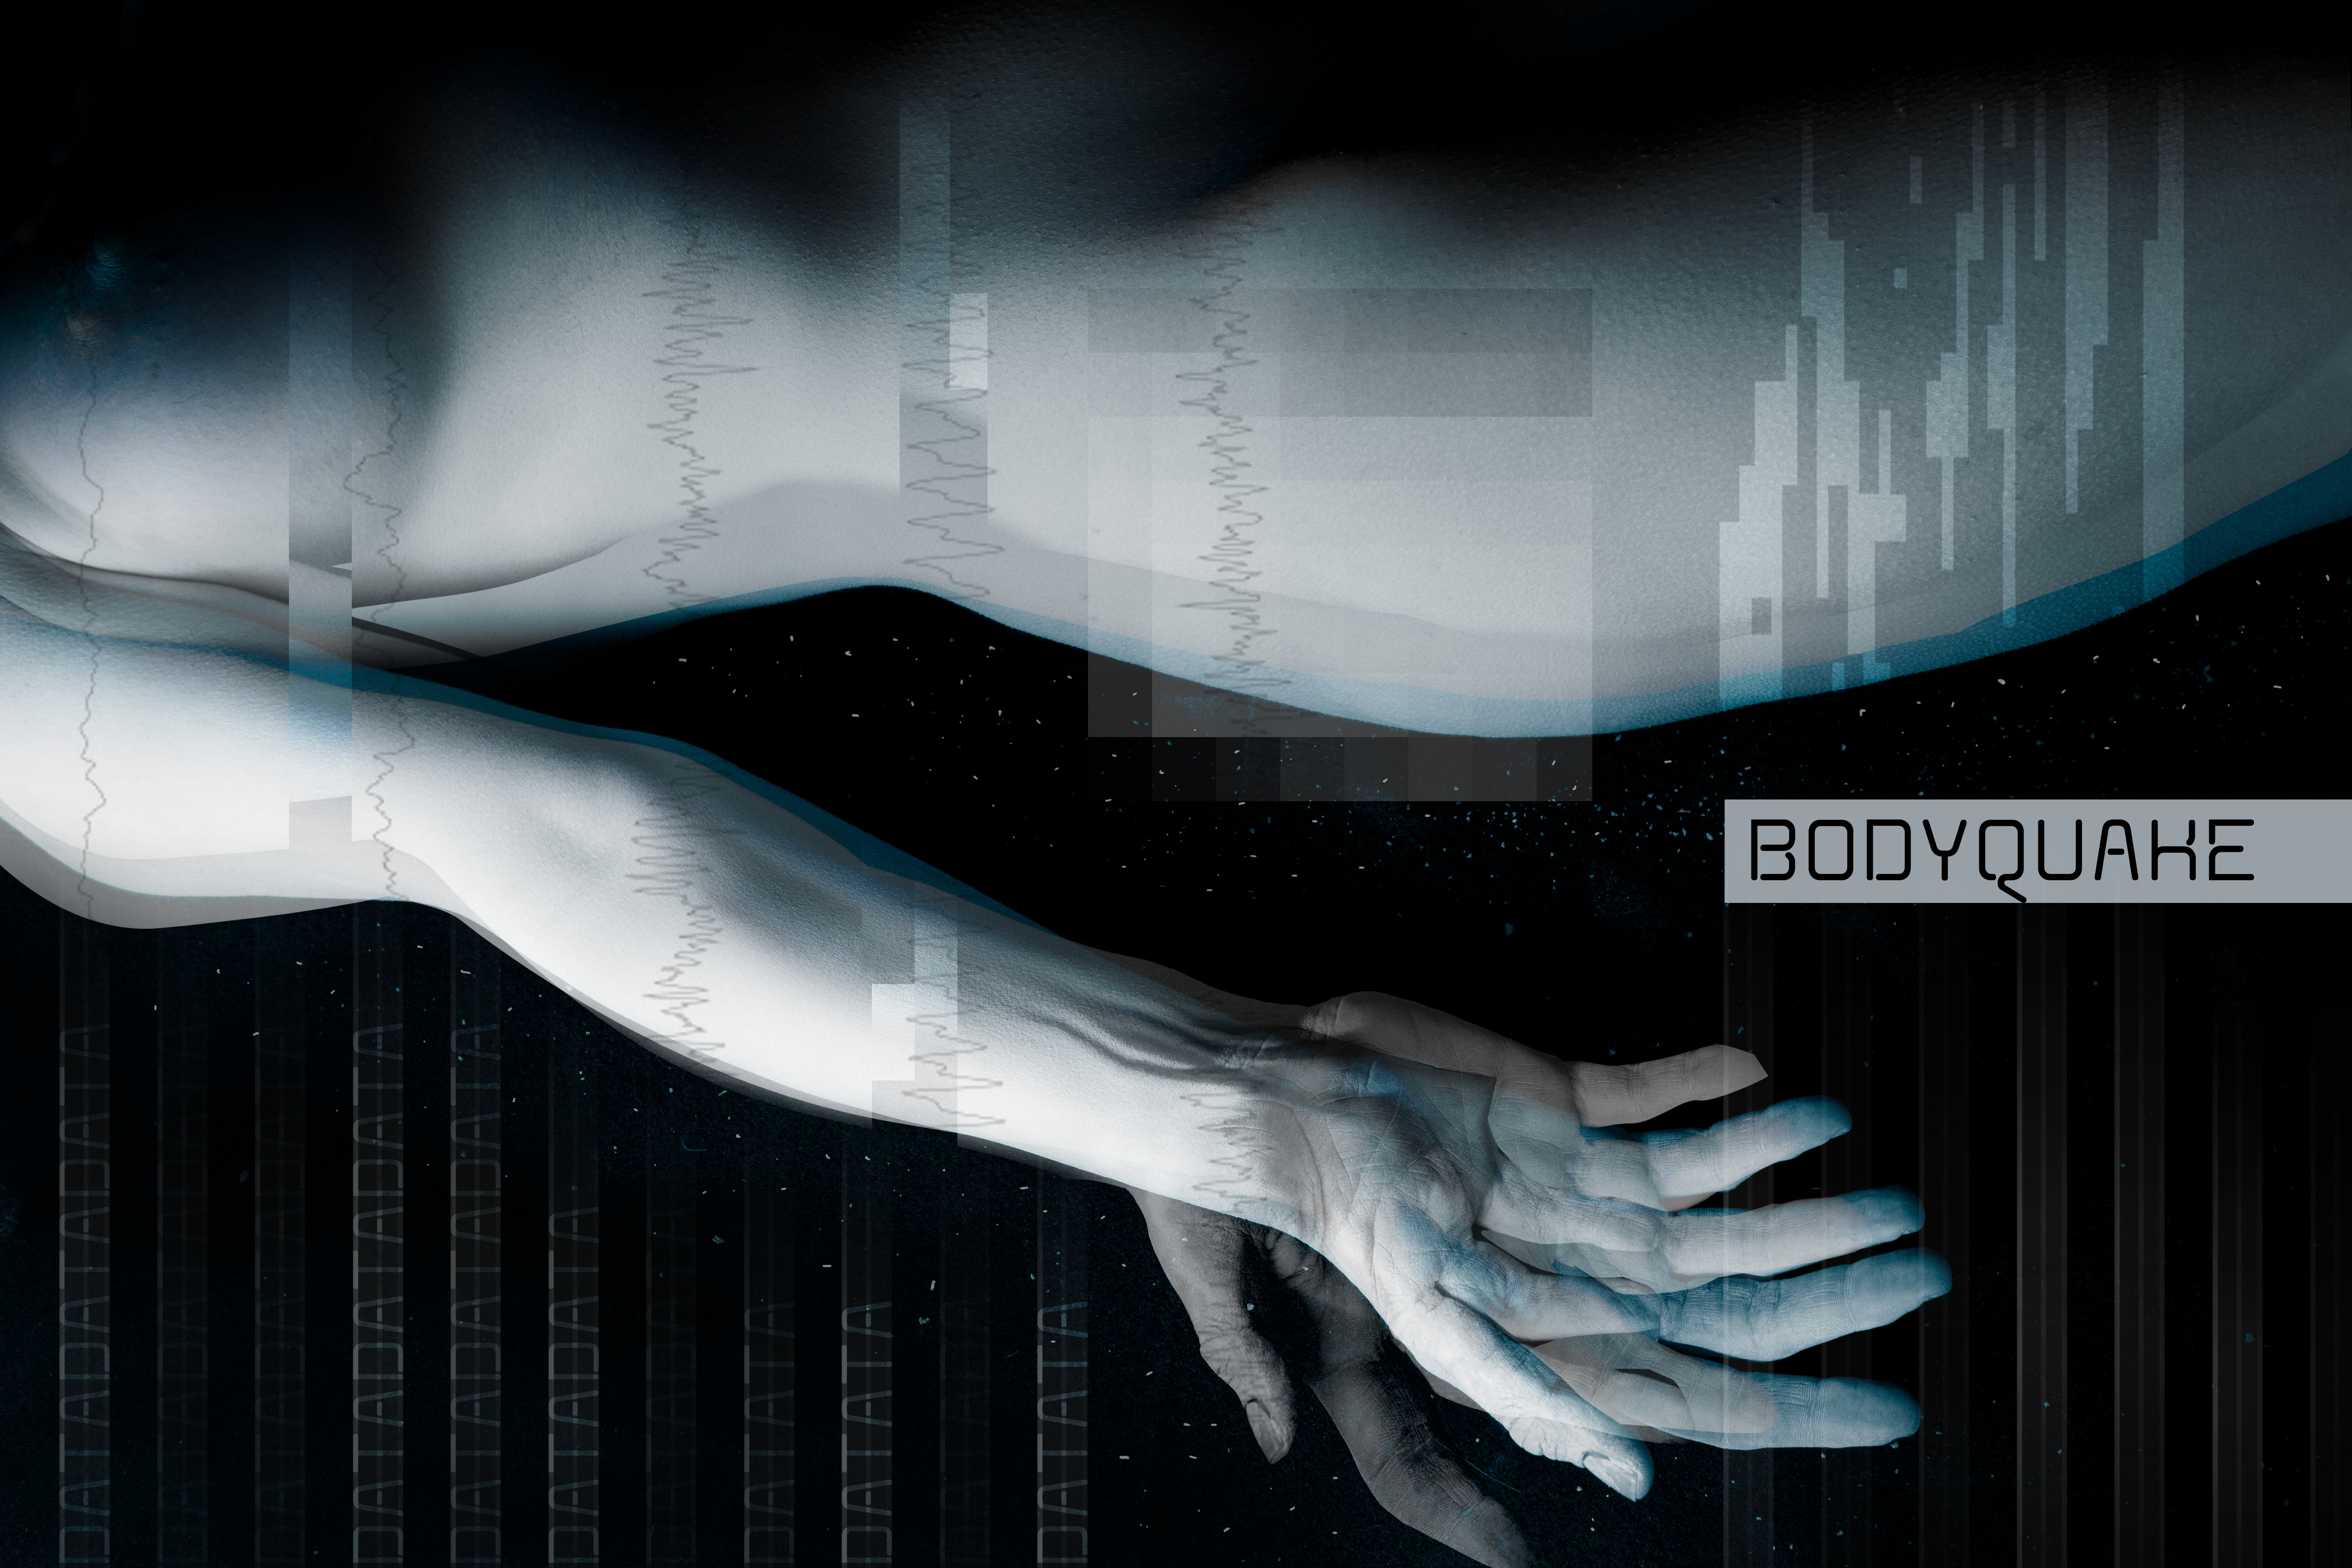 BodyQuake. A Concert for Bodies + Data